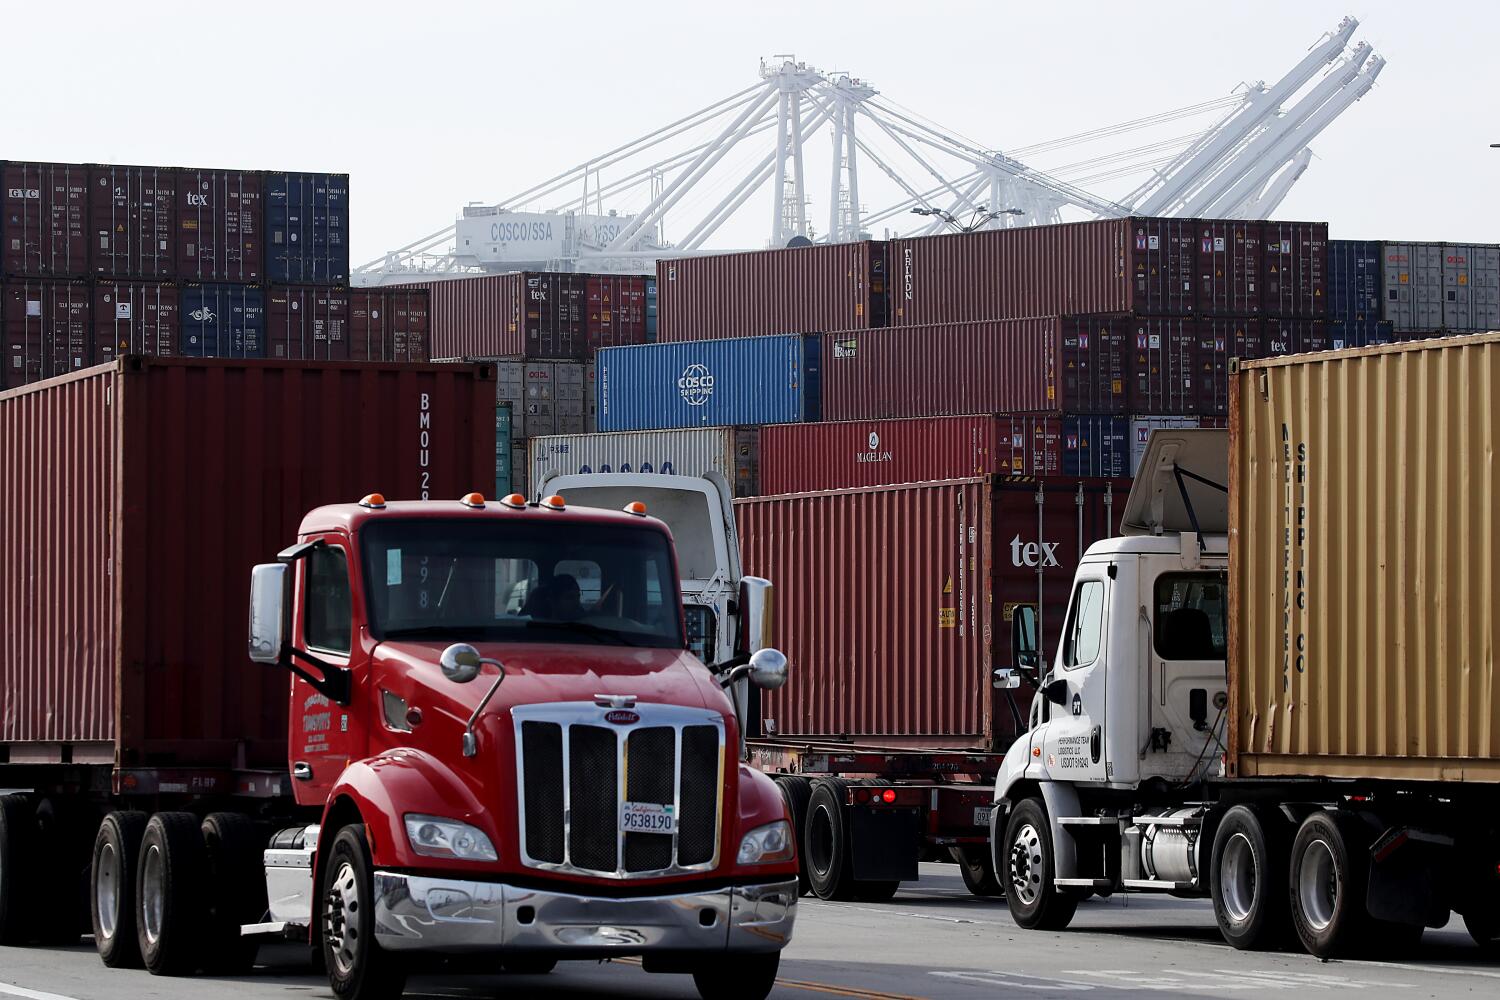 California voted to ban new diesel trucks at ports. Why did L.A. and Long Beach just add 1,000 more?